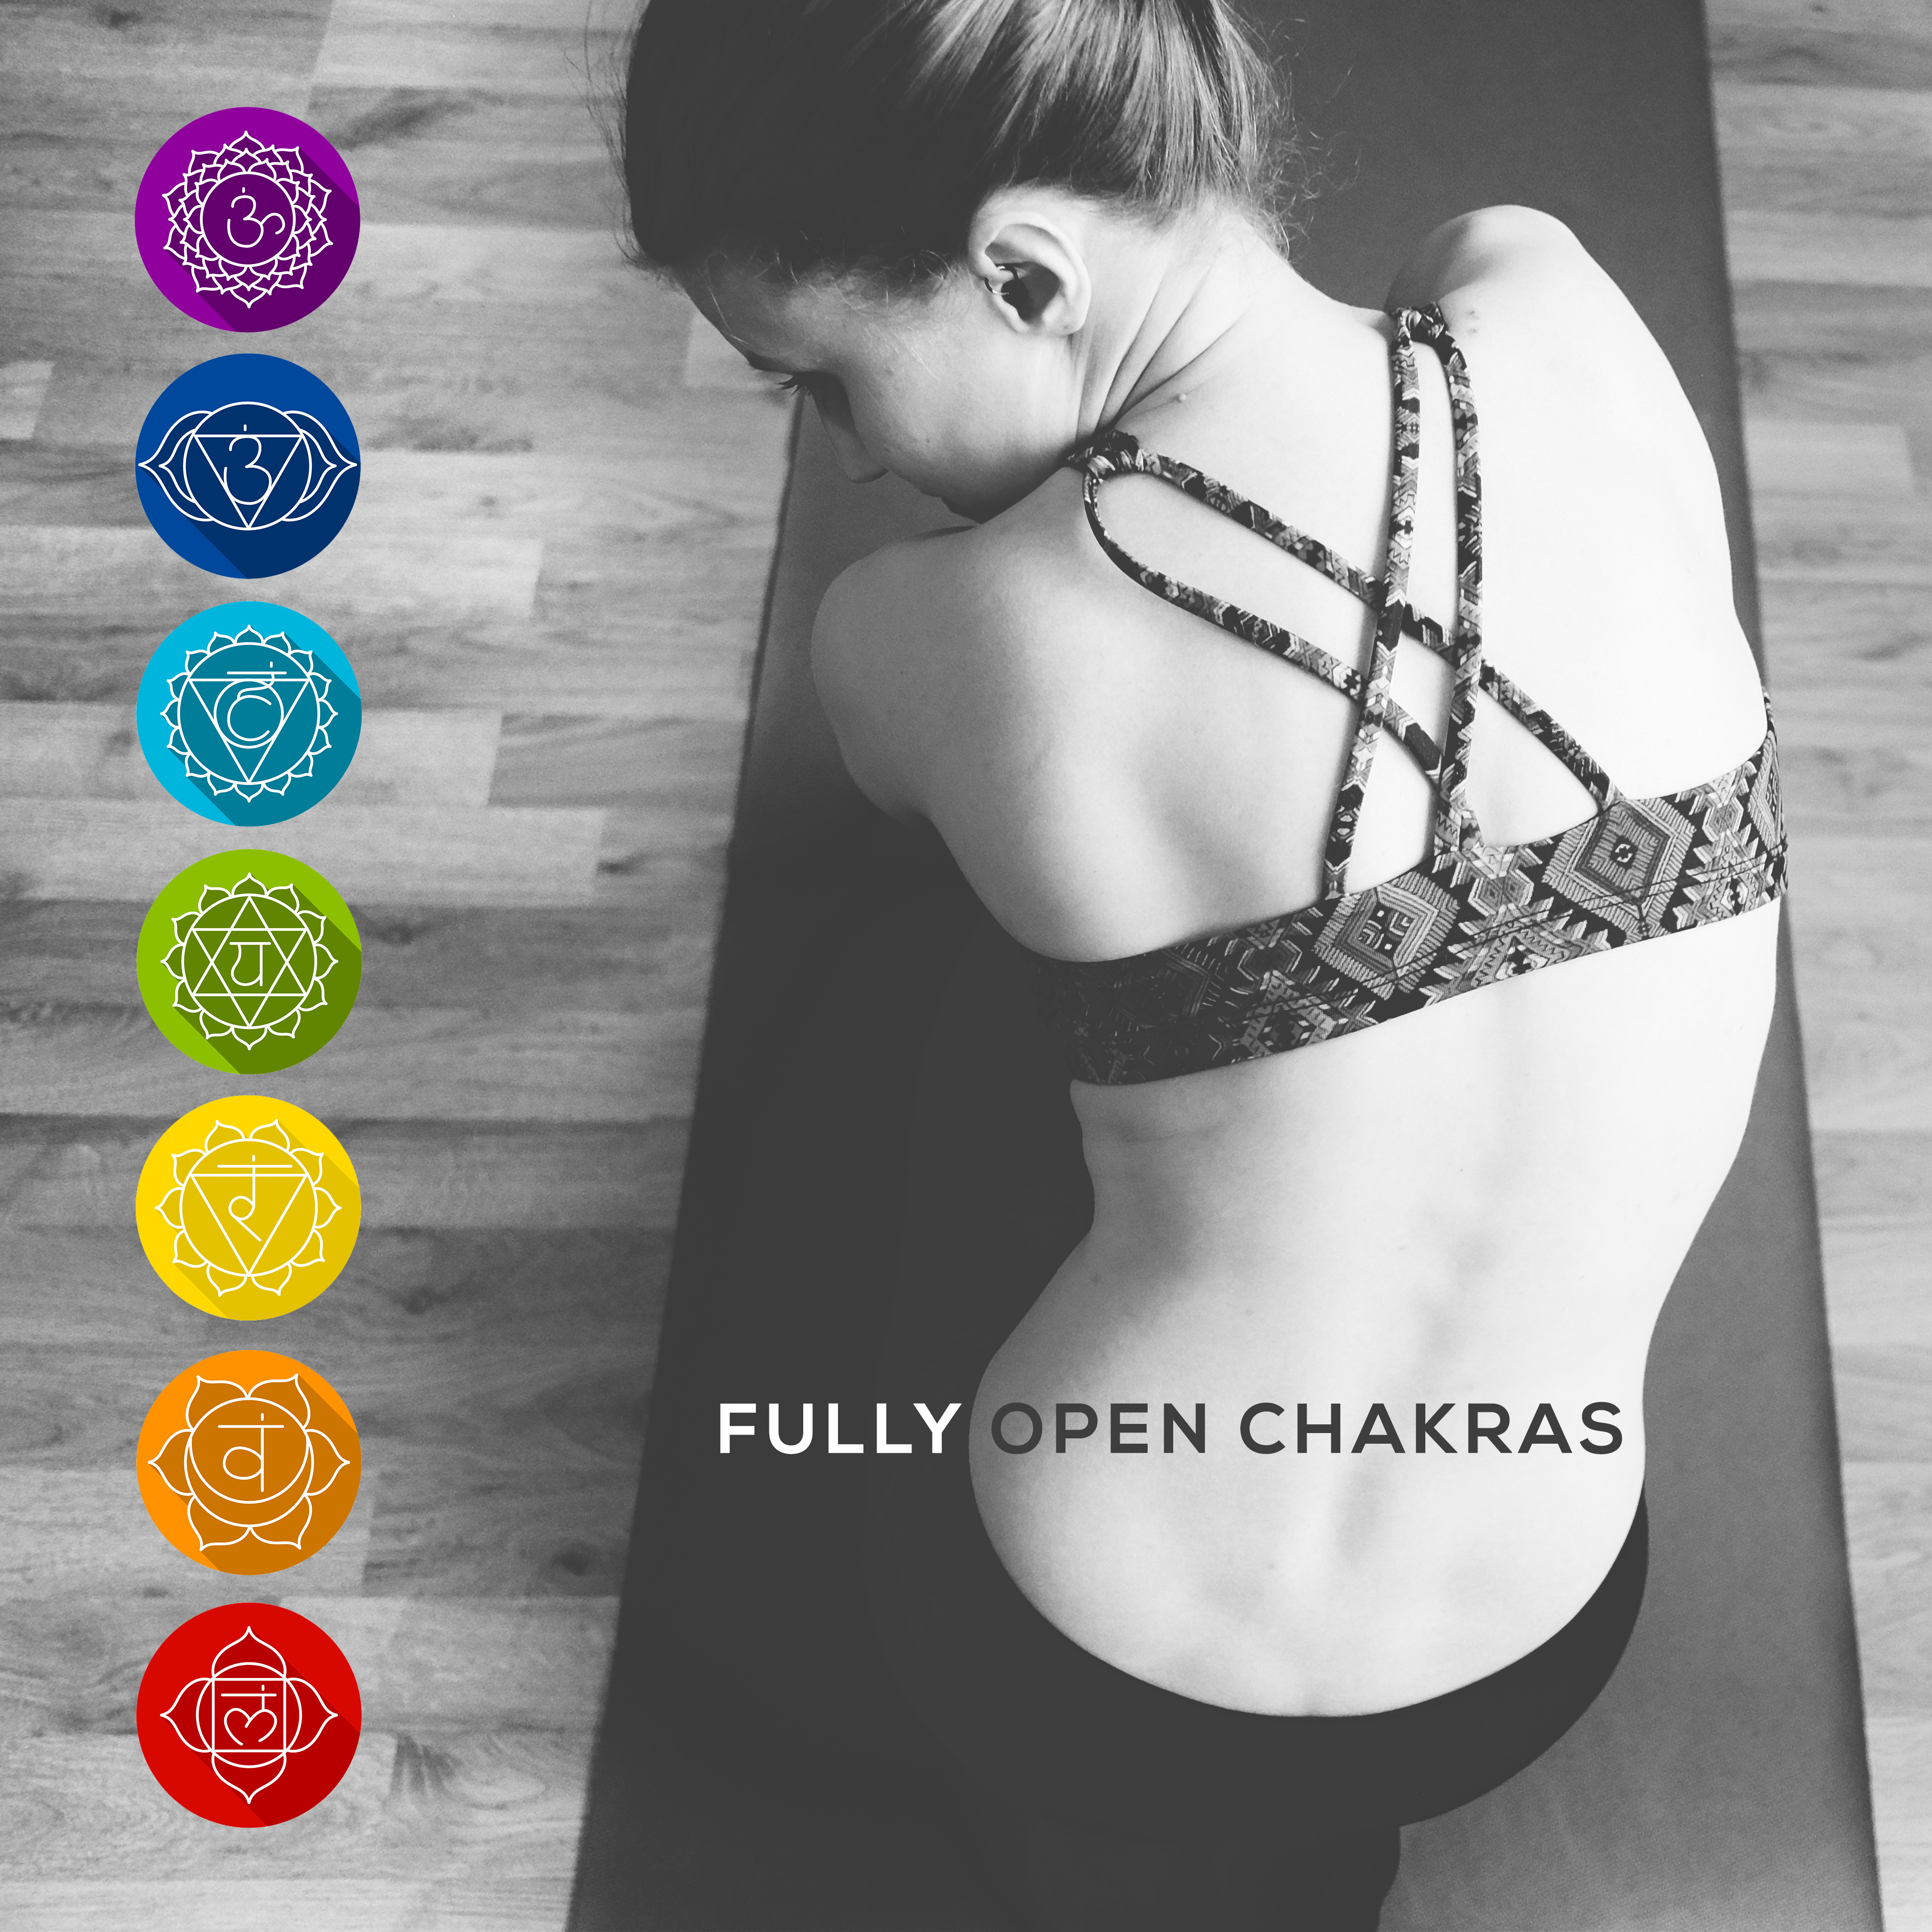 Fully Open Chakras: Meditative Music, Helpful in Total Unblocking and Free Energy Flow